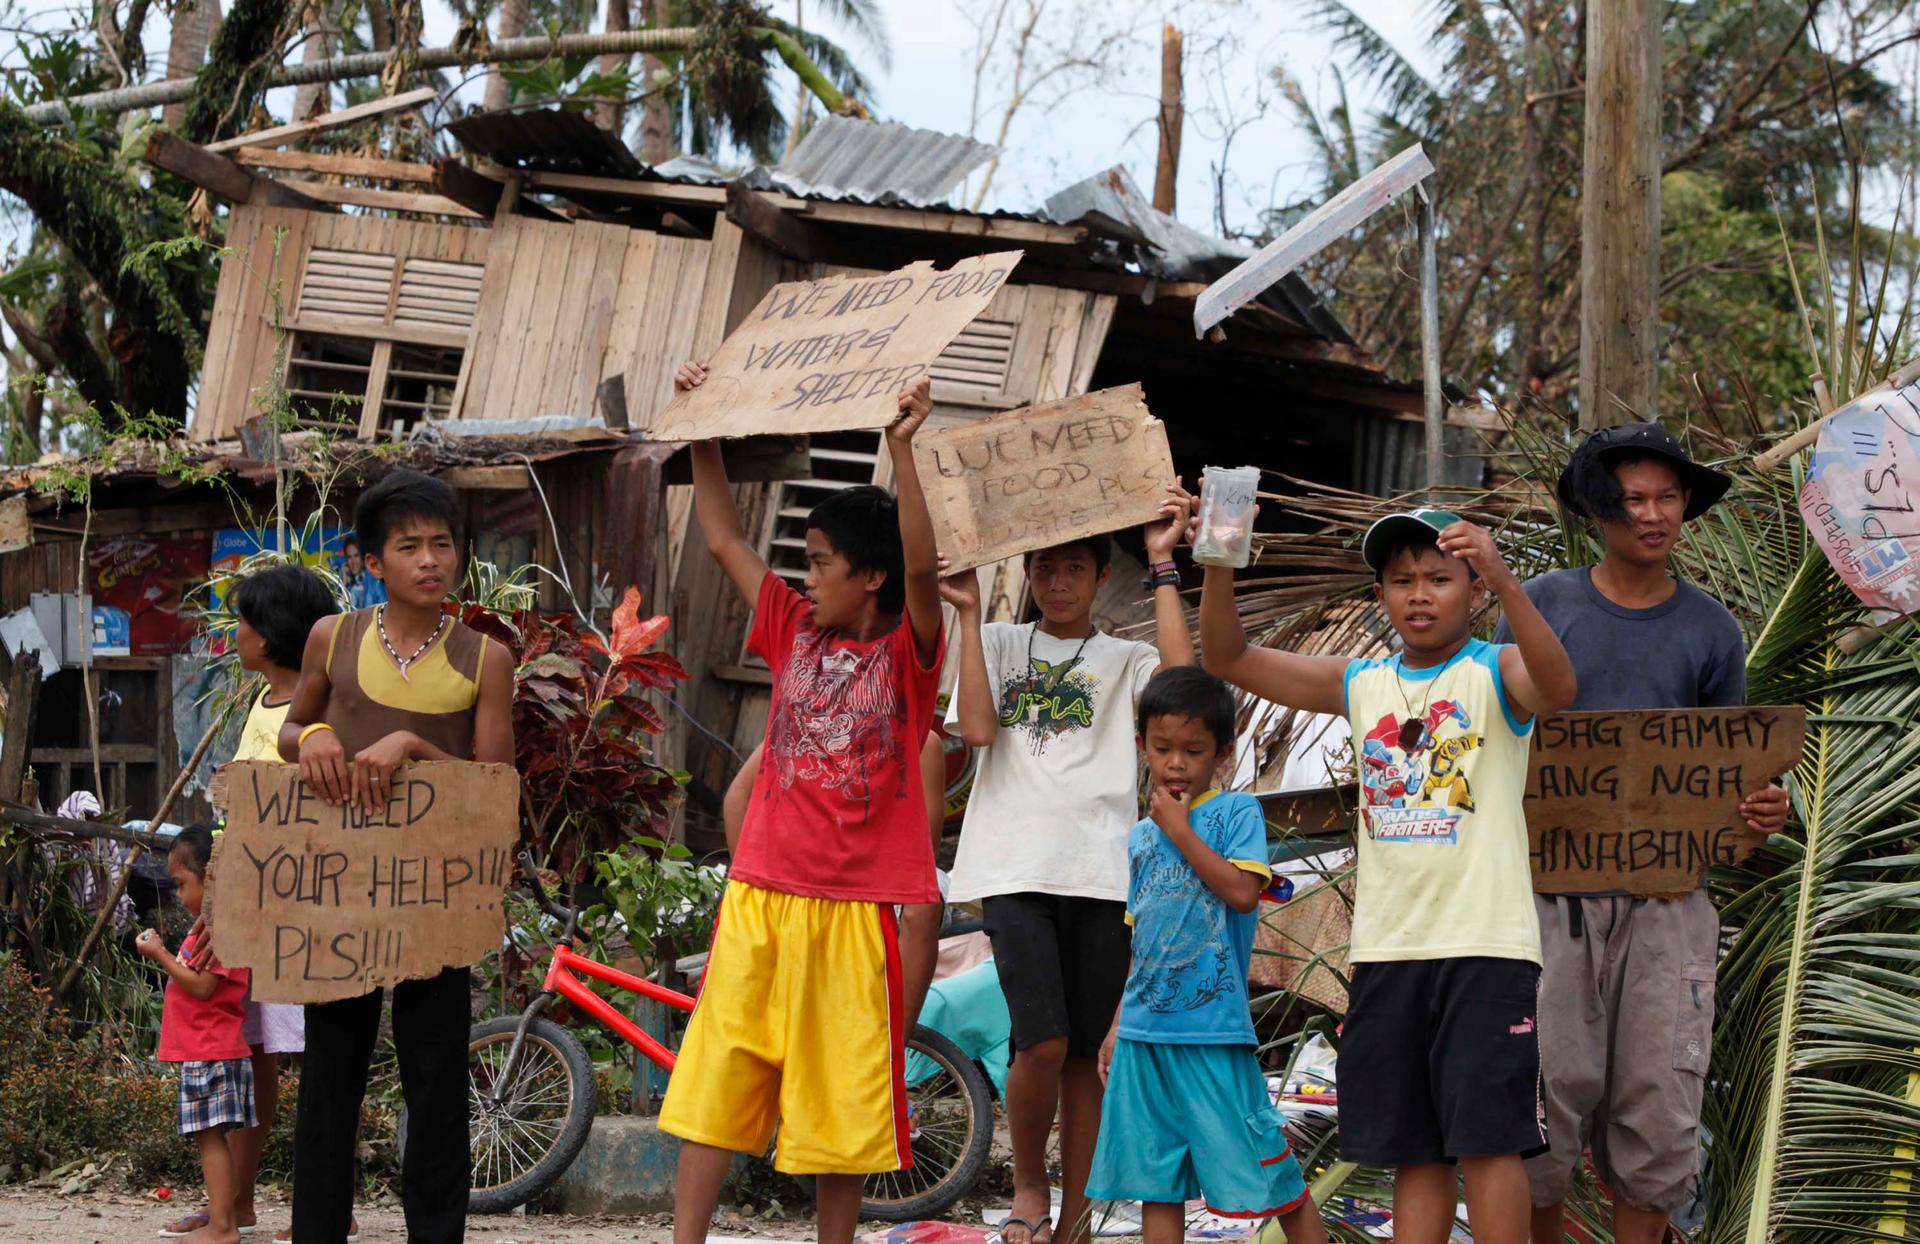 Children hold signs asking for help and food along the highway, after Typhoon Haiyan hit Tabogon town in Cebu Province